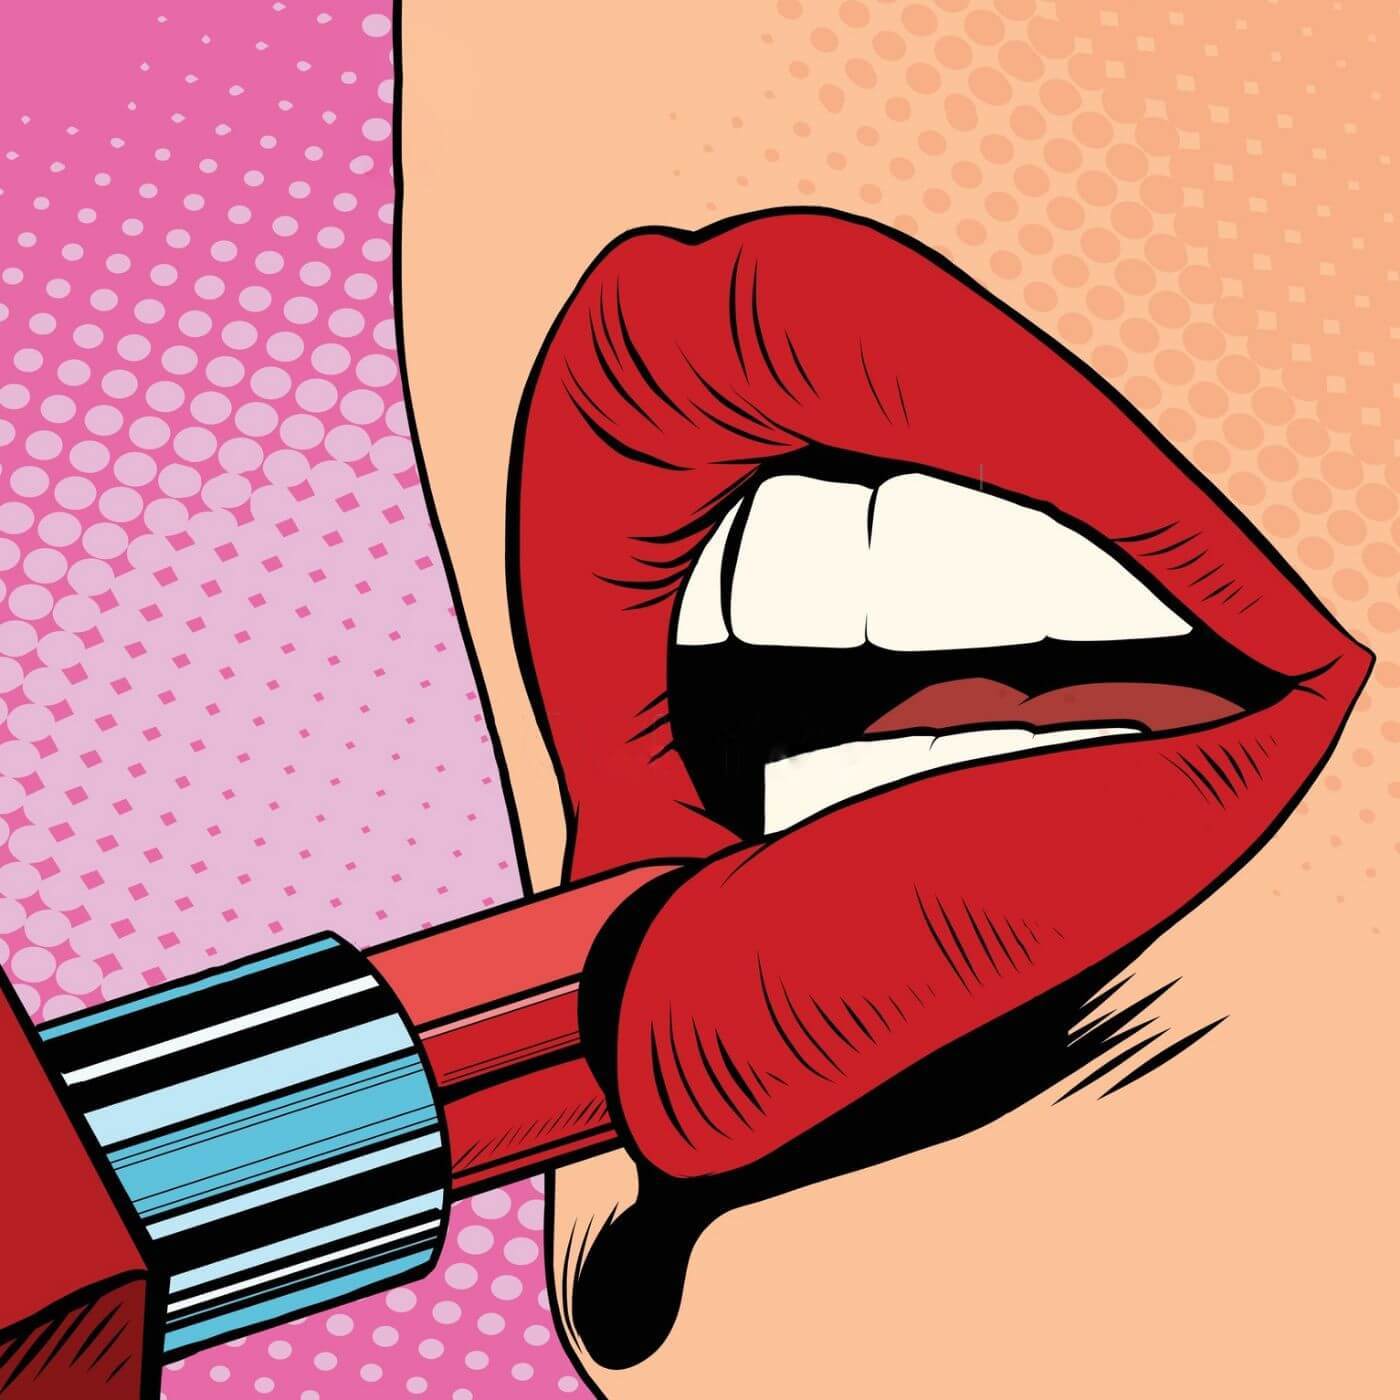 Girl Paints Lips with Red Lipstick - Sexy Pop Art Painting Square - Art Prints by Tallenge Store | Buy Posters, Frames, Canvas &amp; Digital Art Prints | Small, Compact, Medium and Large Variants